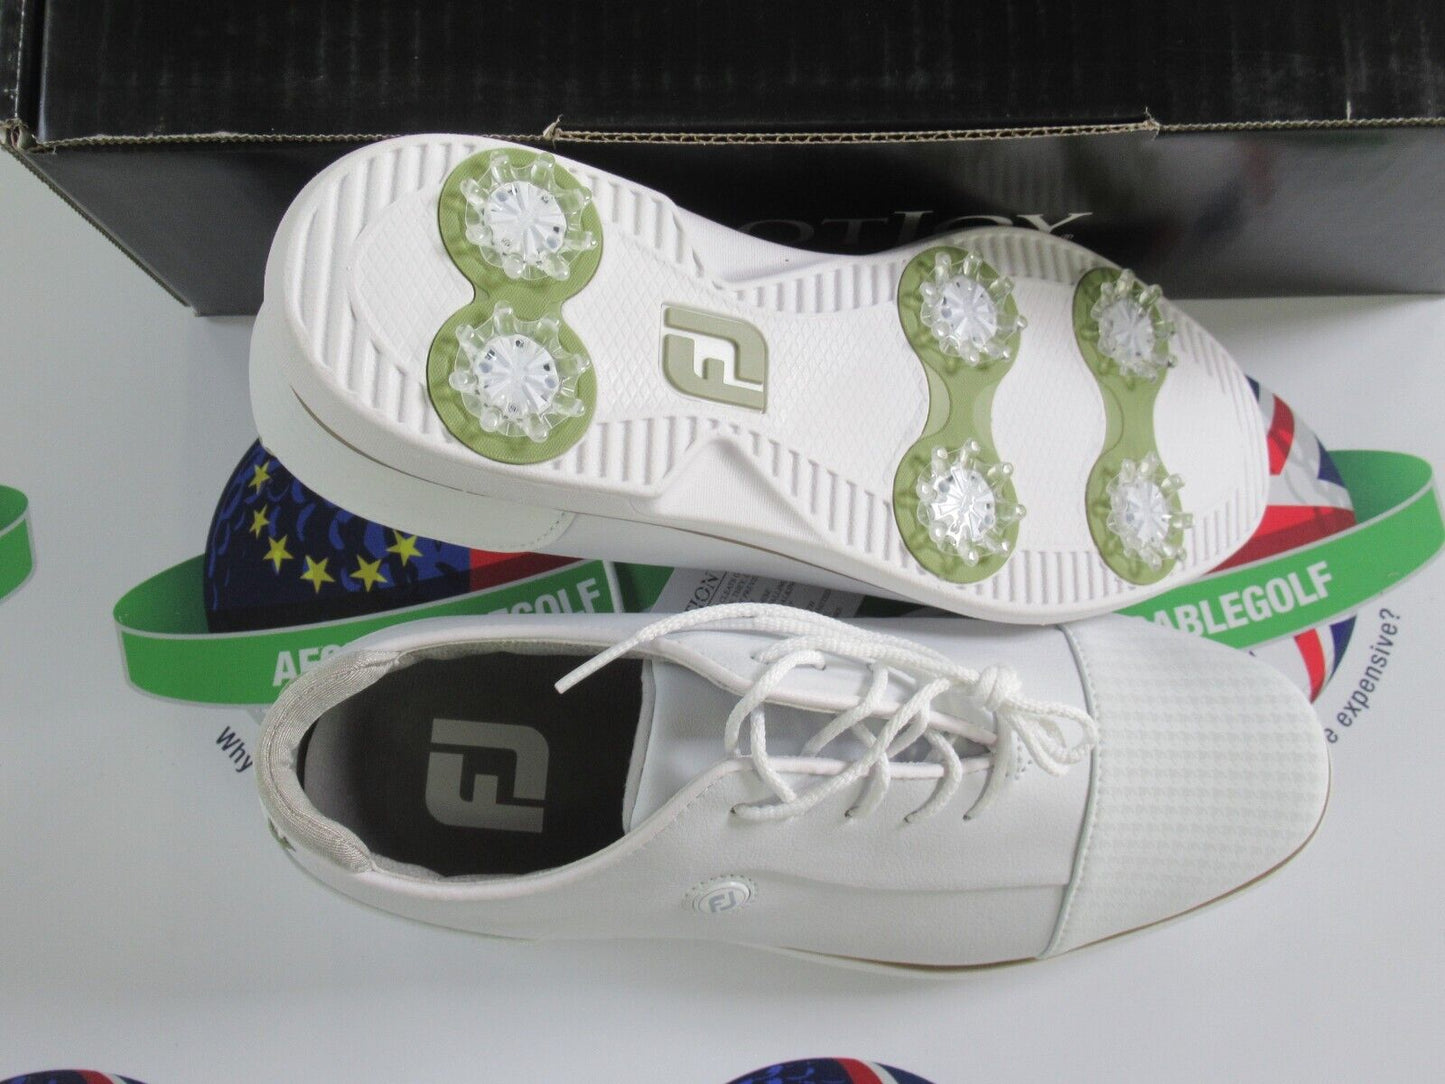 footjoy fj traditions womens golf shoes 97914k white uk size 5.5 wide/large